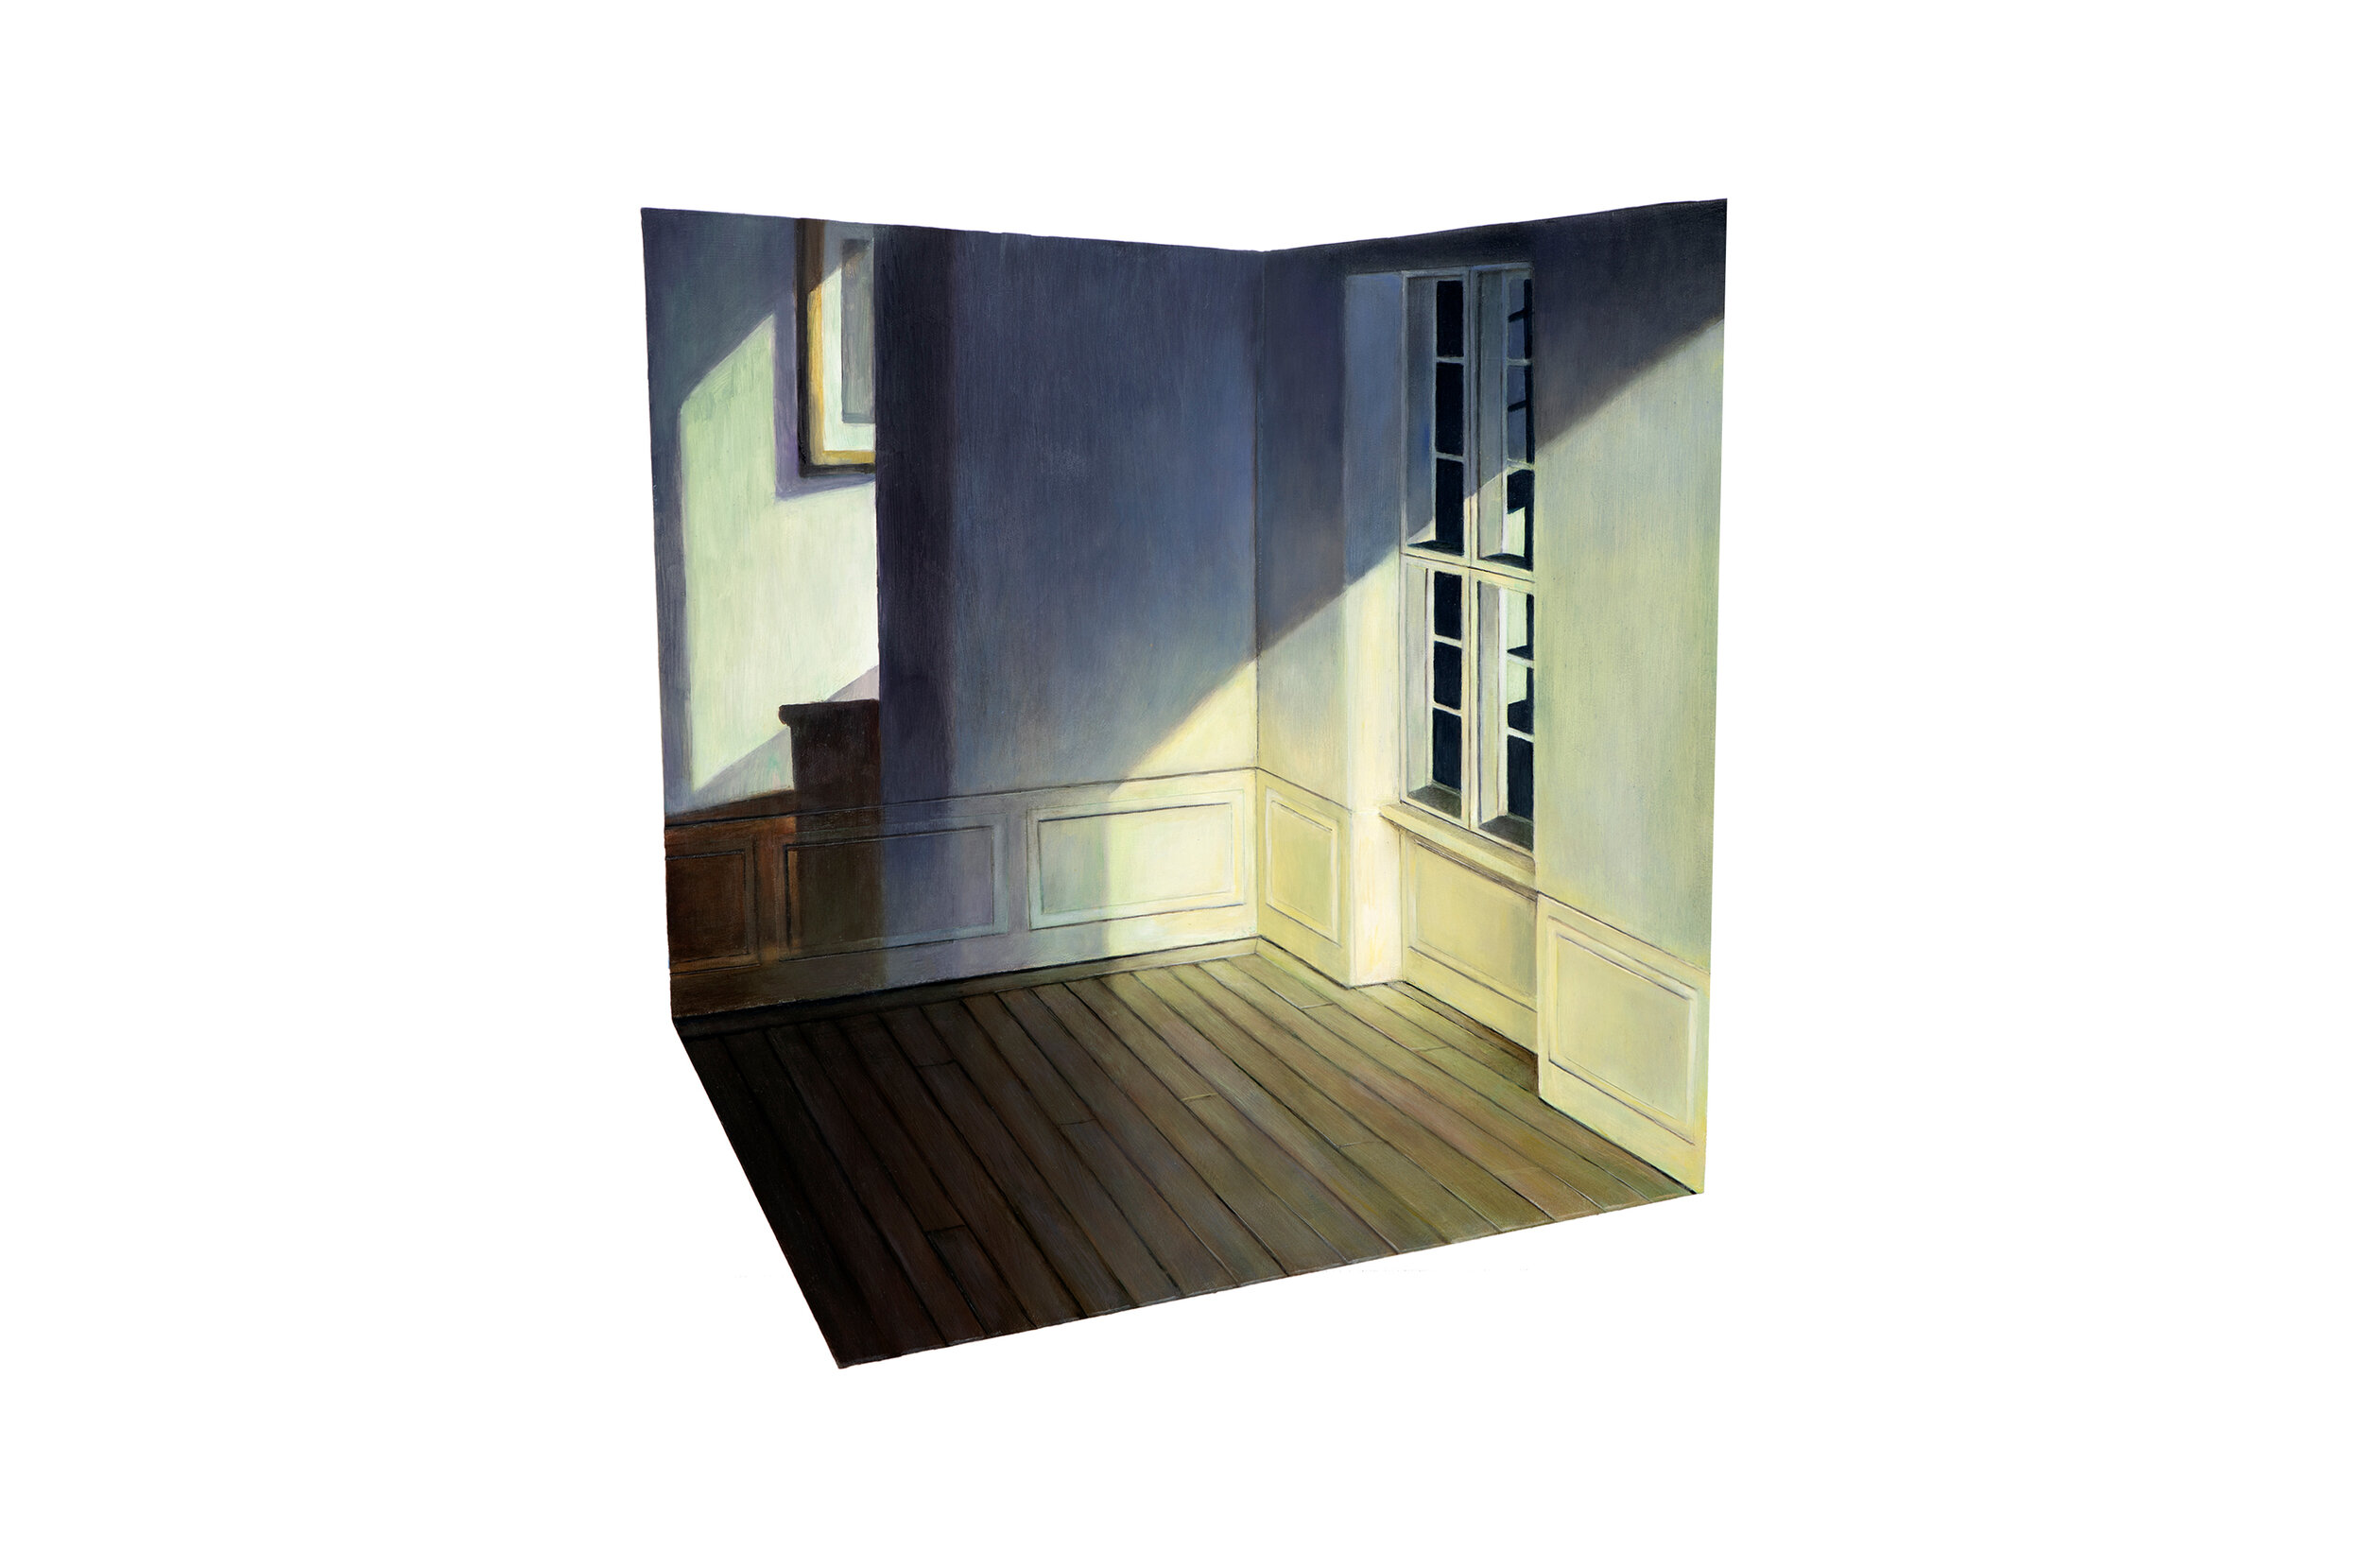   Edward Hopper’s “Rooms by the Sear” Projected over Model of Hammershøi’s Room    2019  Oil on shaped and raised relief panel  15 x 13.75  inches 